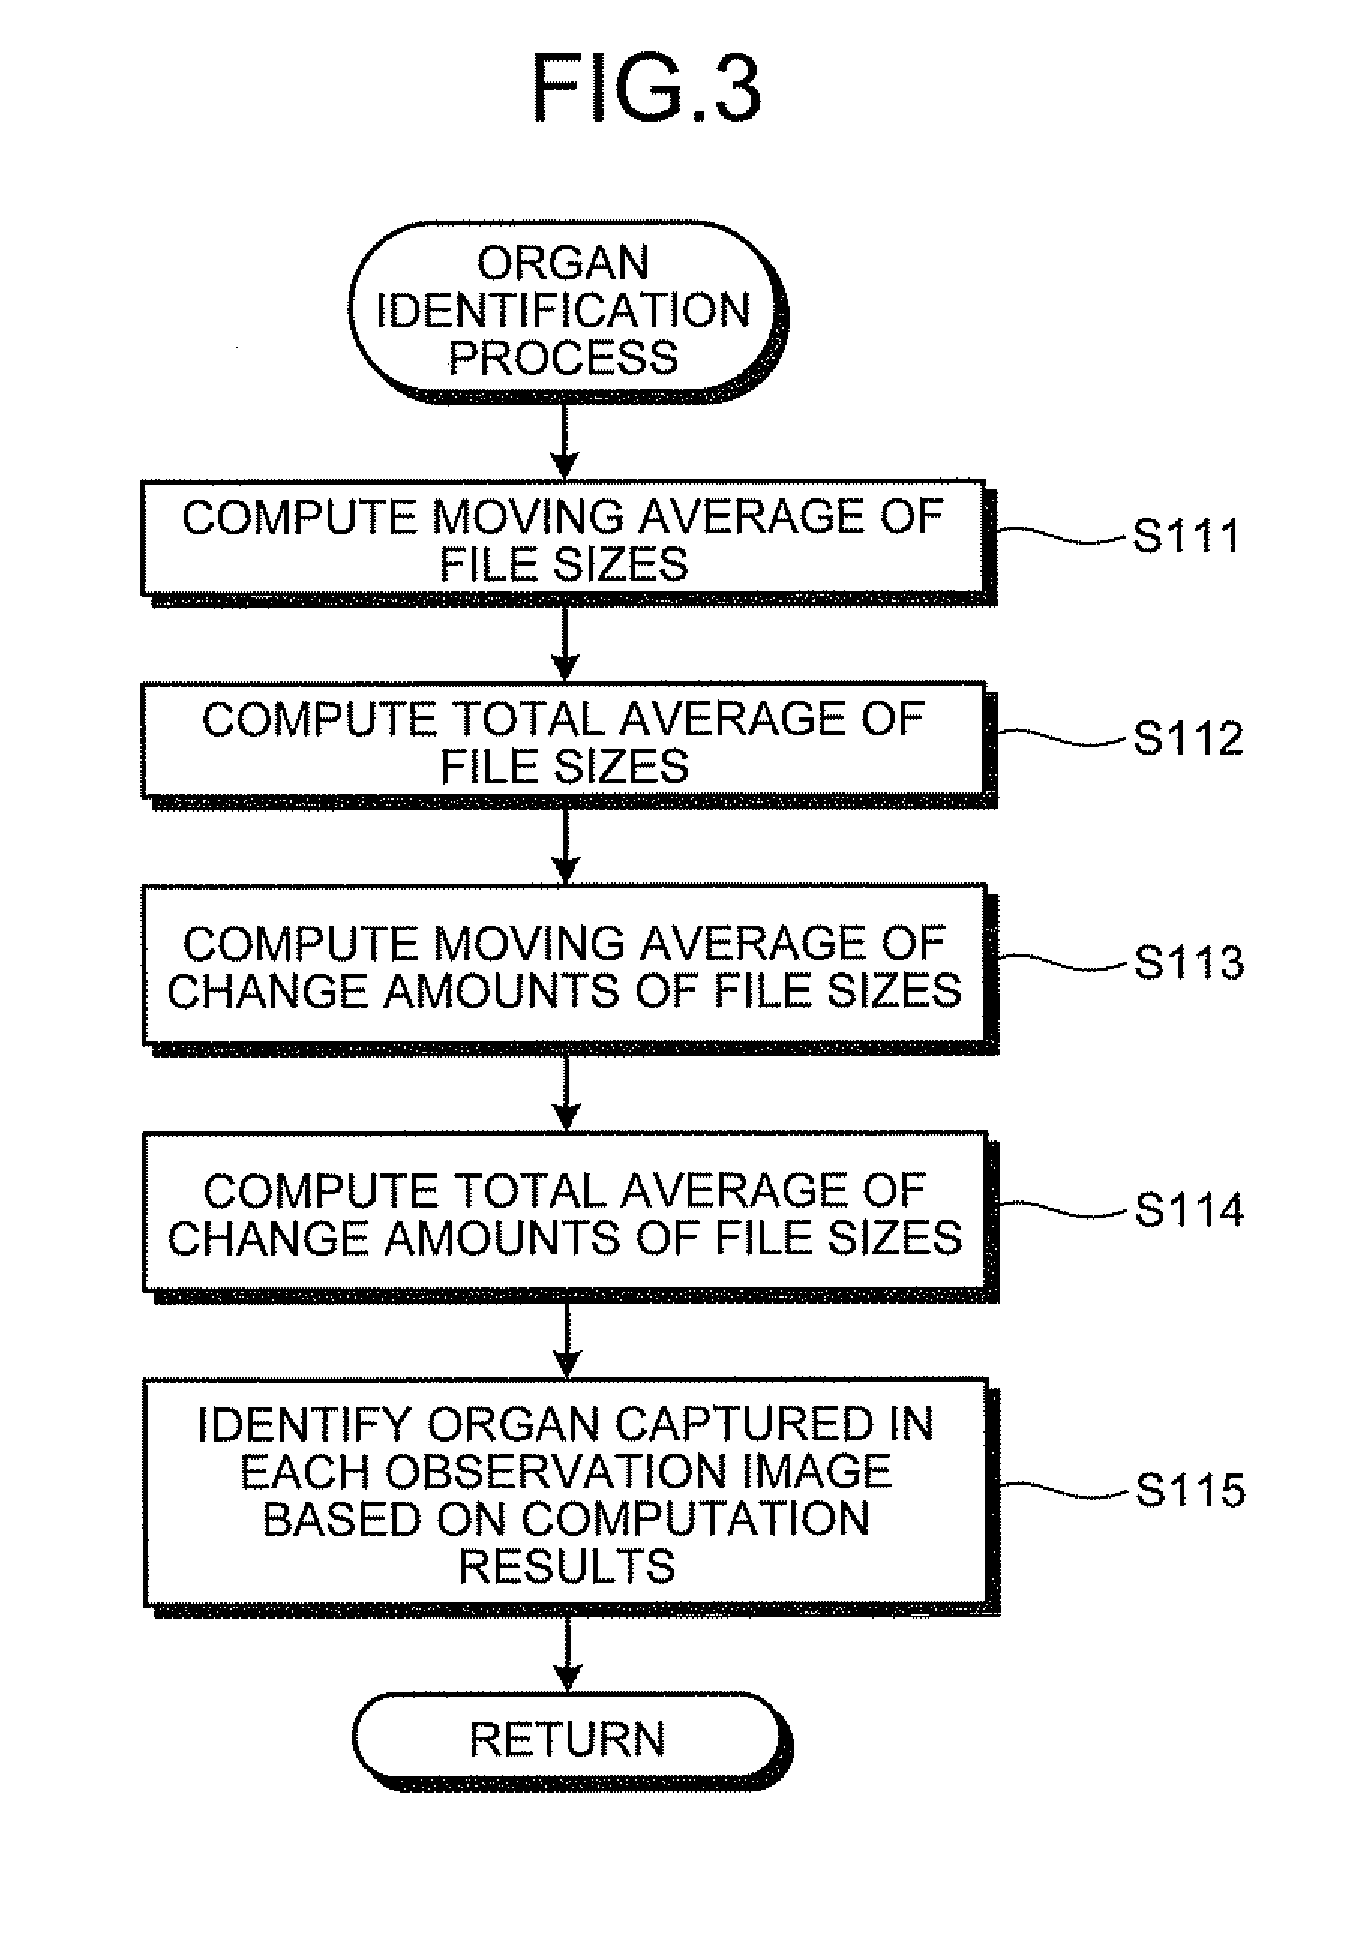 Image processing apparatus and image processing program product